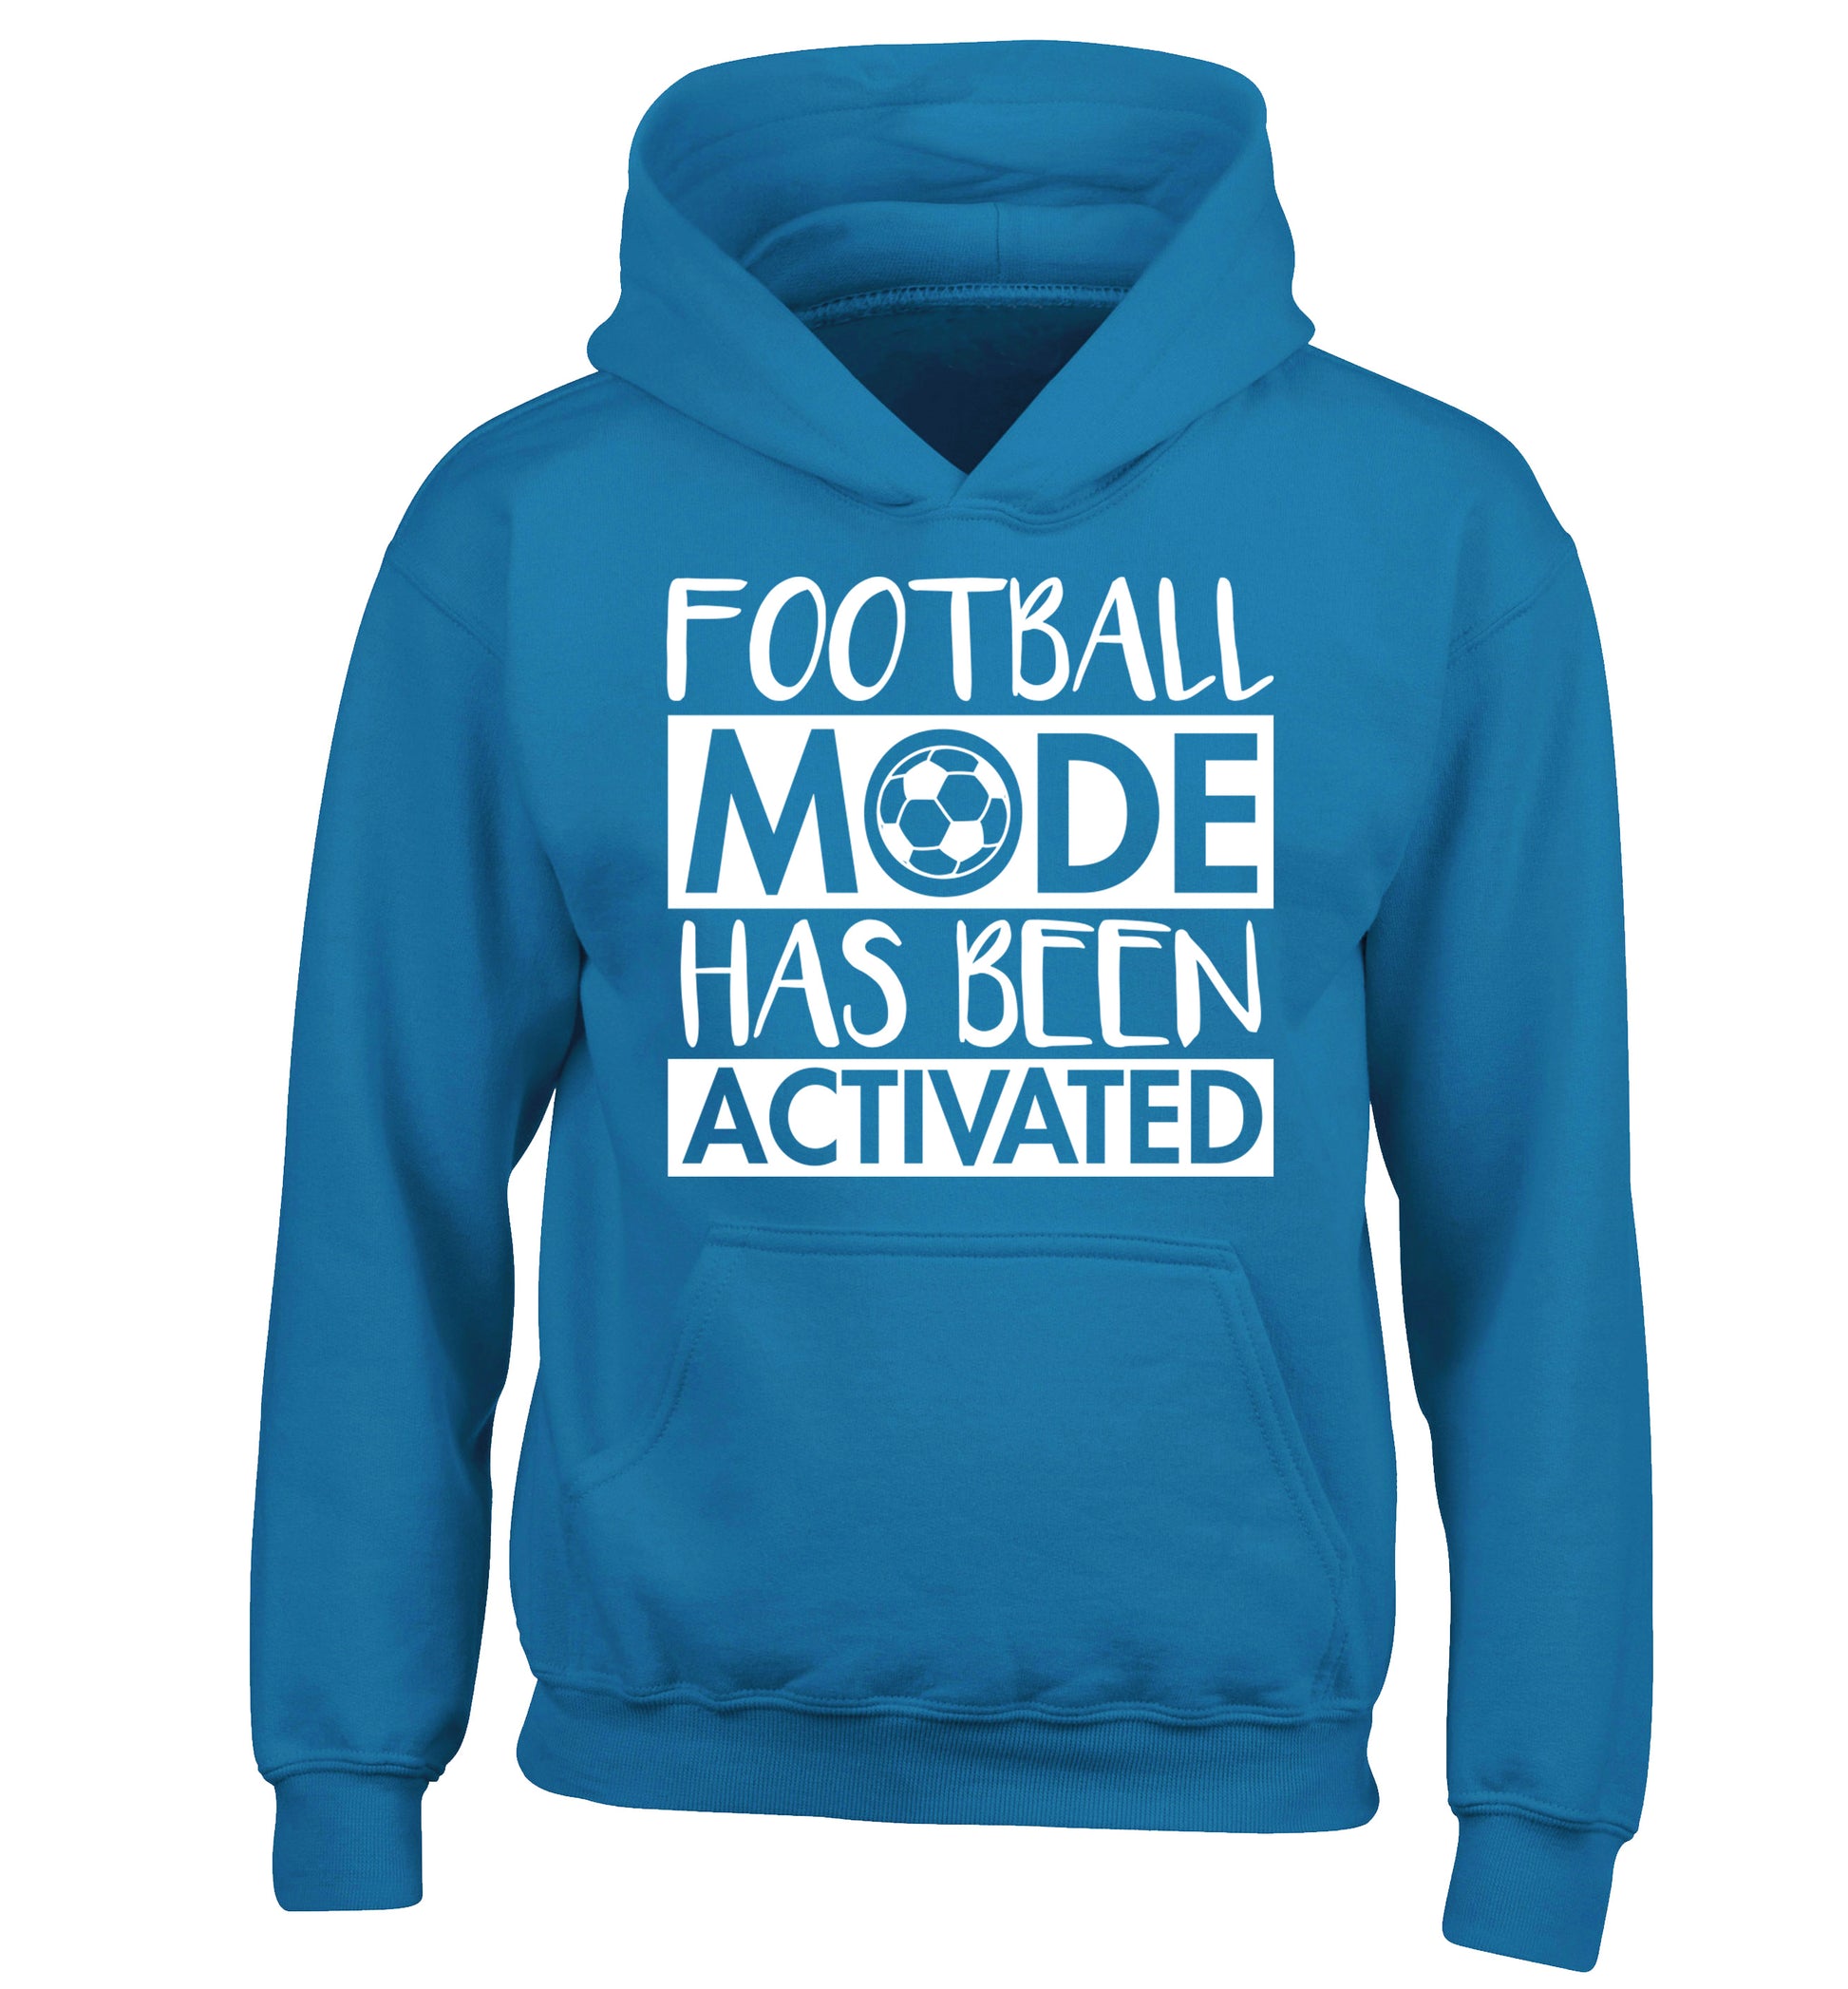 Football mode has been activated children's blue hoodie 12-14 Years